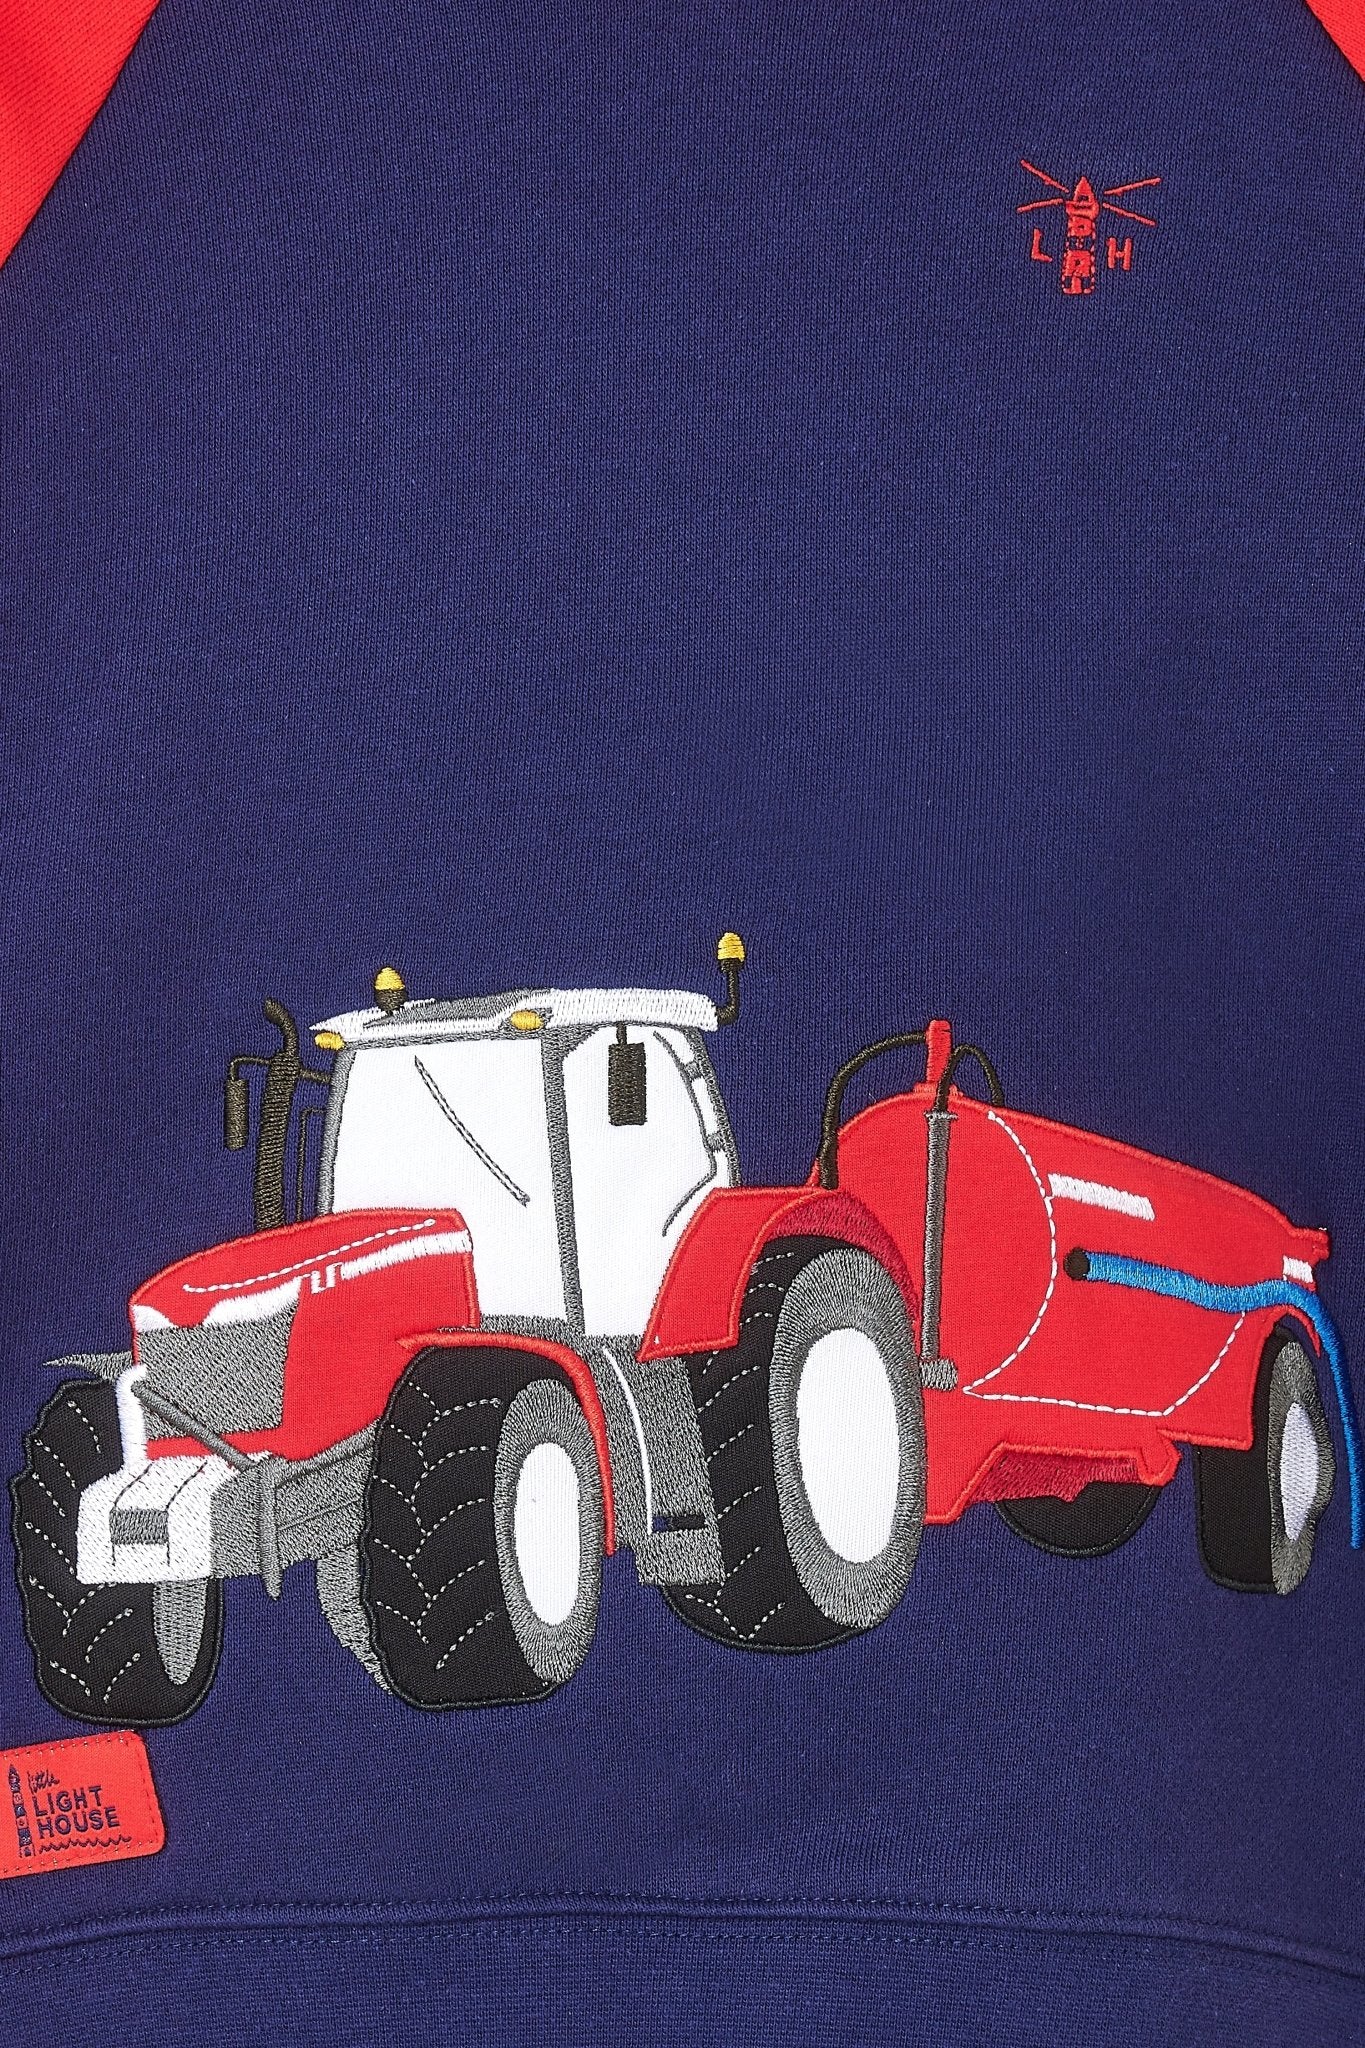 Jack Hoodie - Red Tractor Slurry-Lighthouse